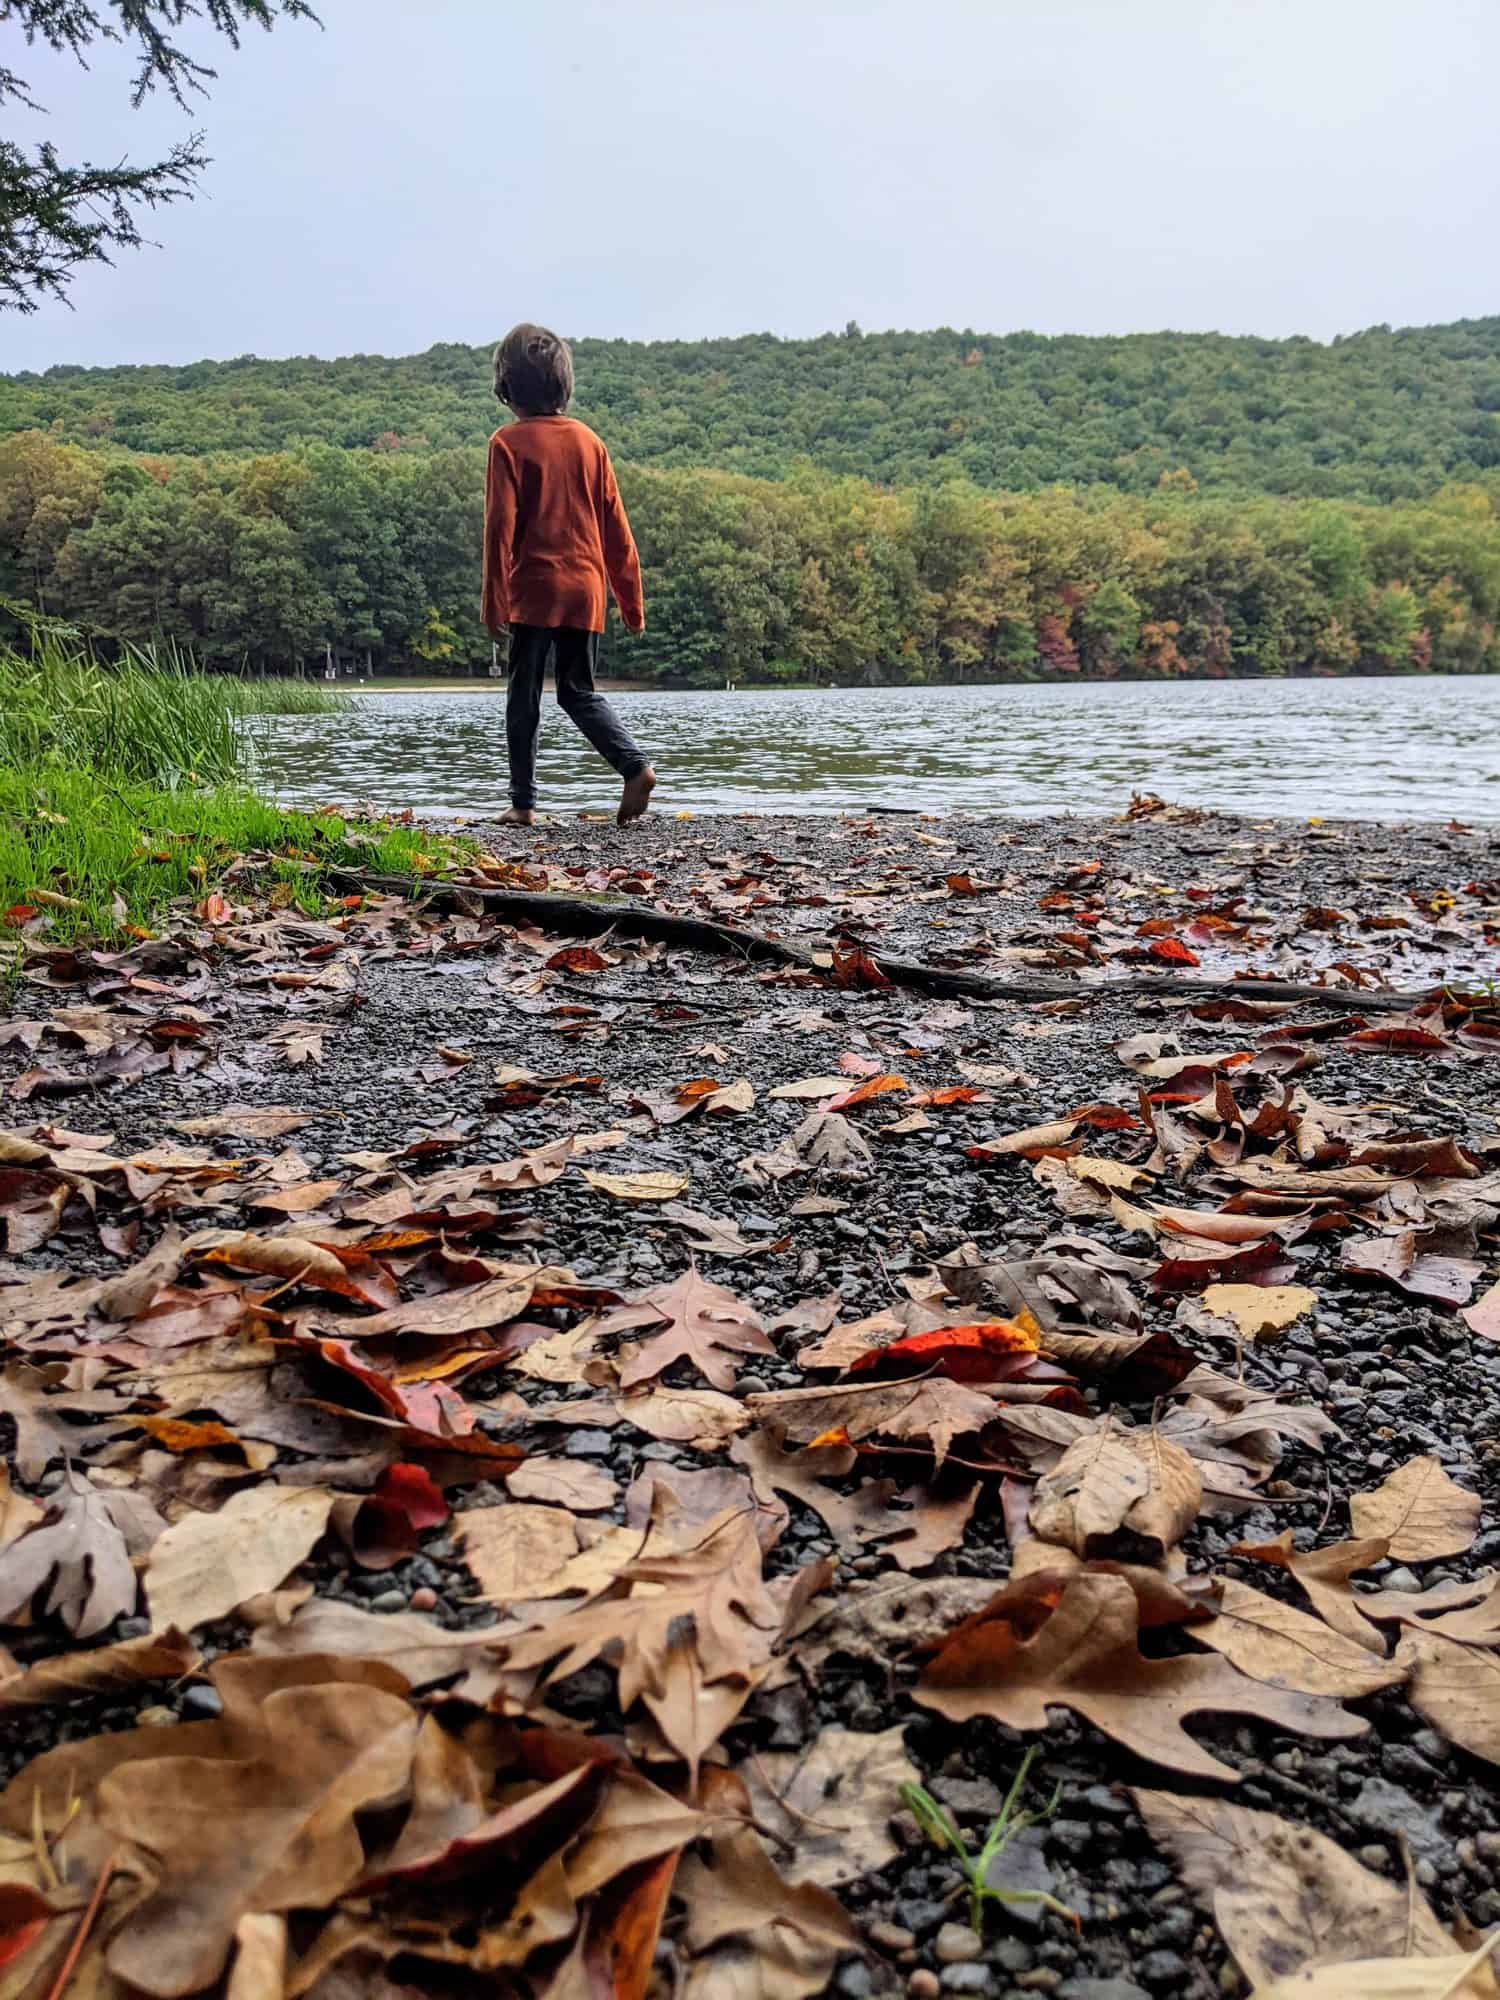 Go on a fall leaf hike with kids - fun fall leaf activities